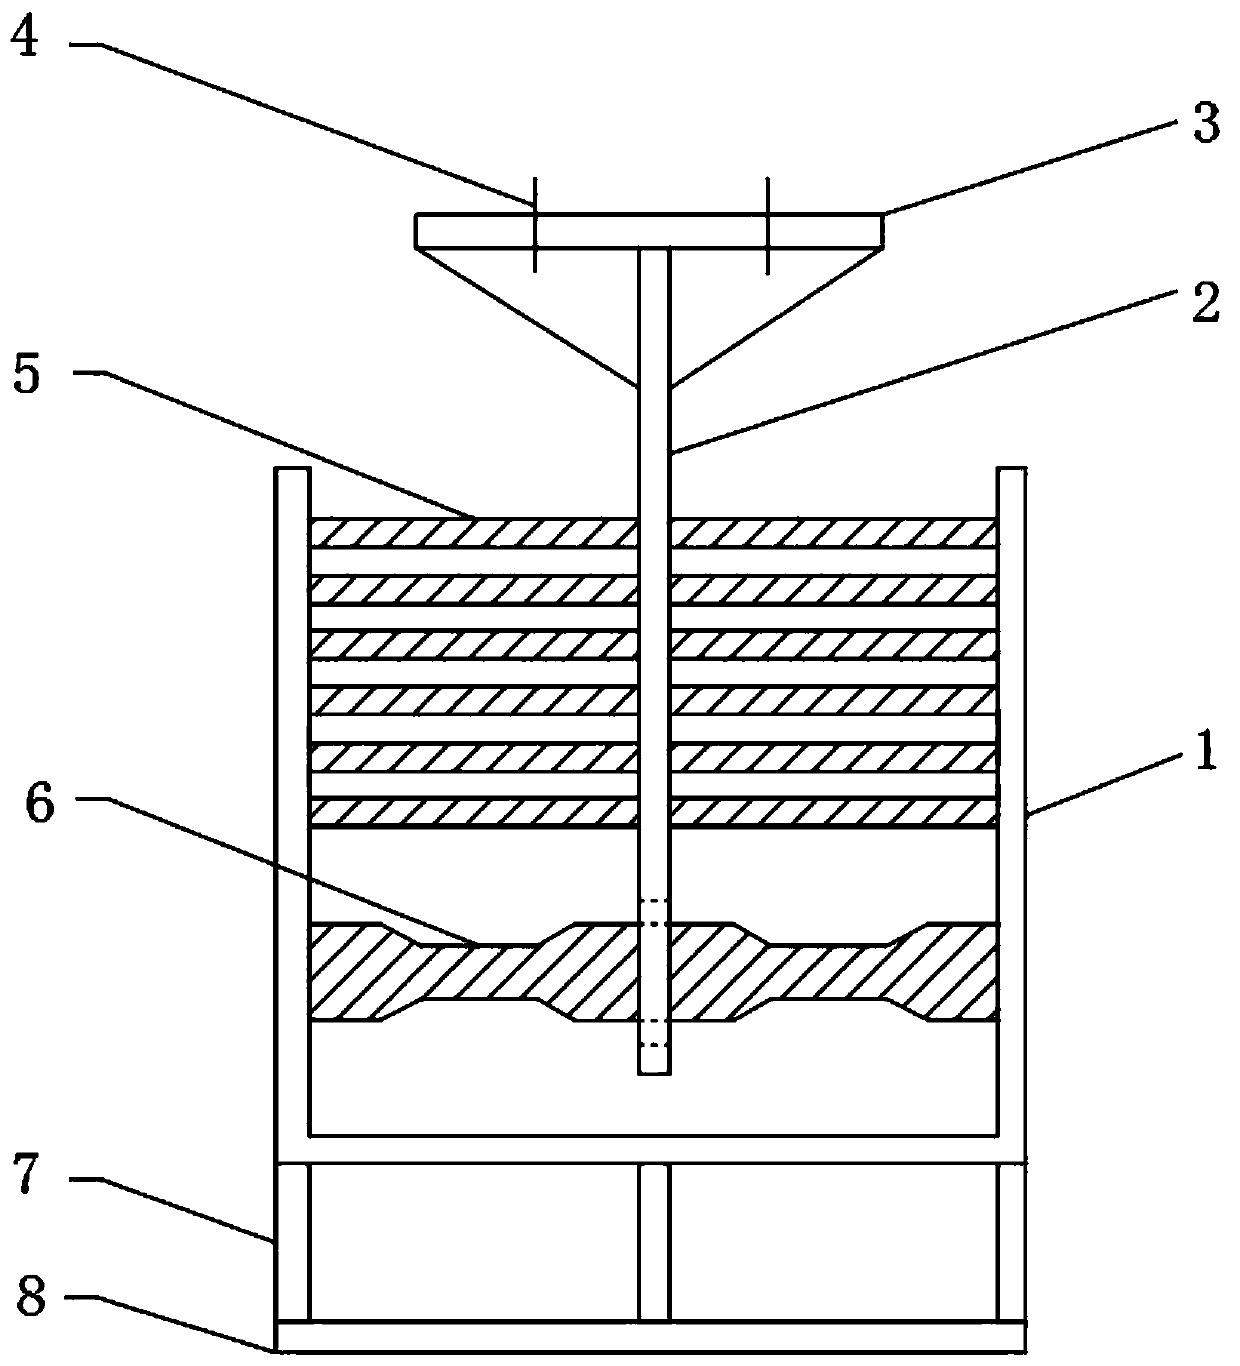 Shearing-bending parallel staged hierarchical energy-dissipation damper